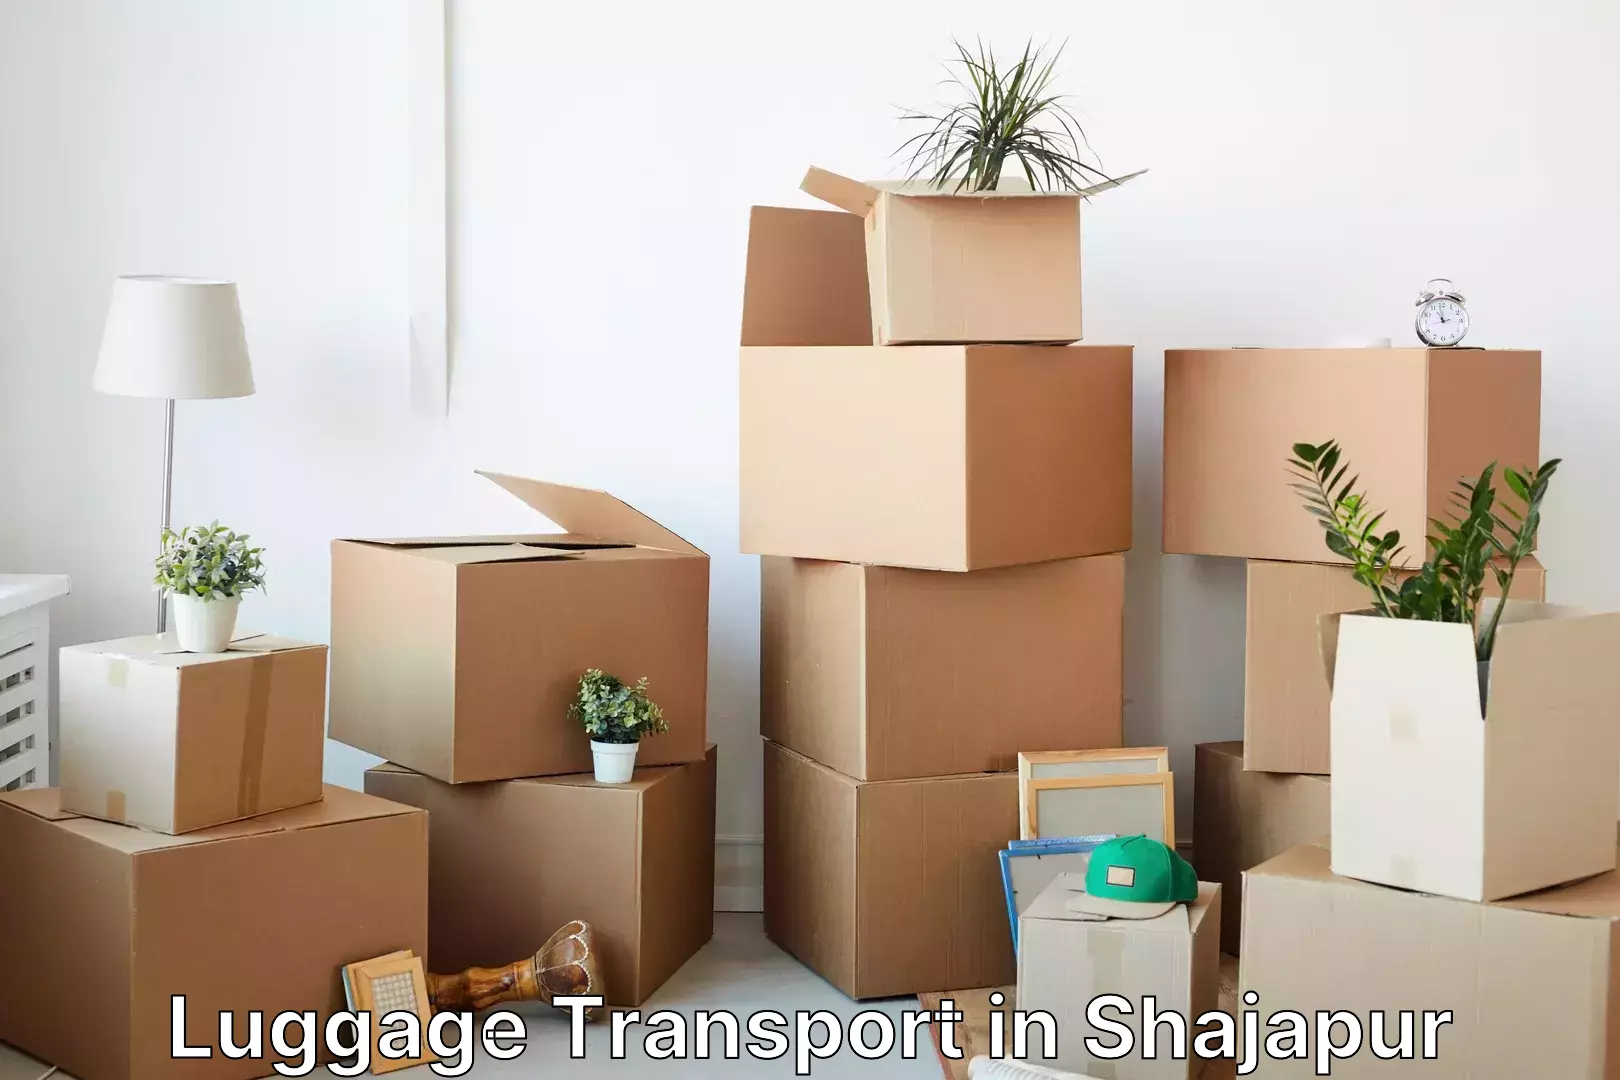 Heavy luggage shipping in Shajapur